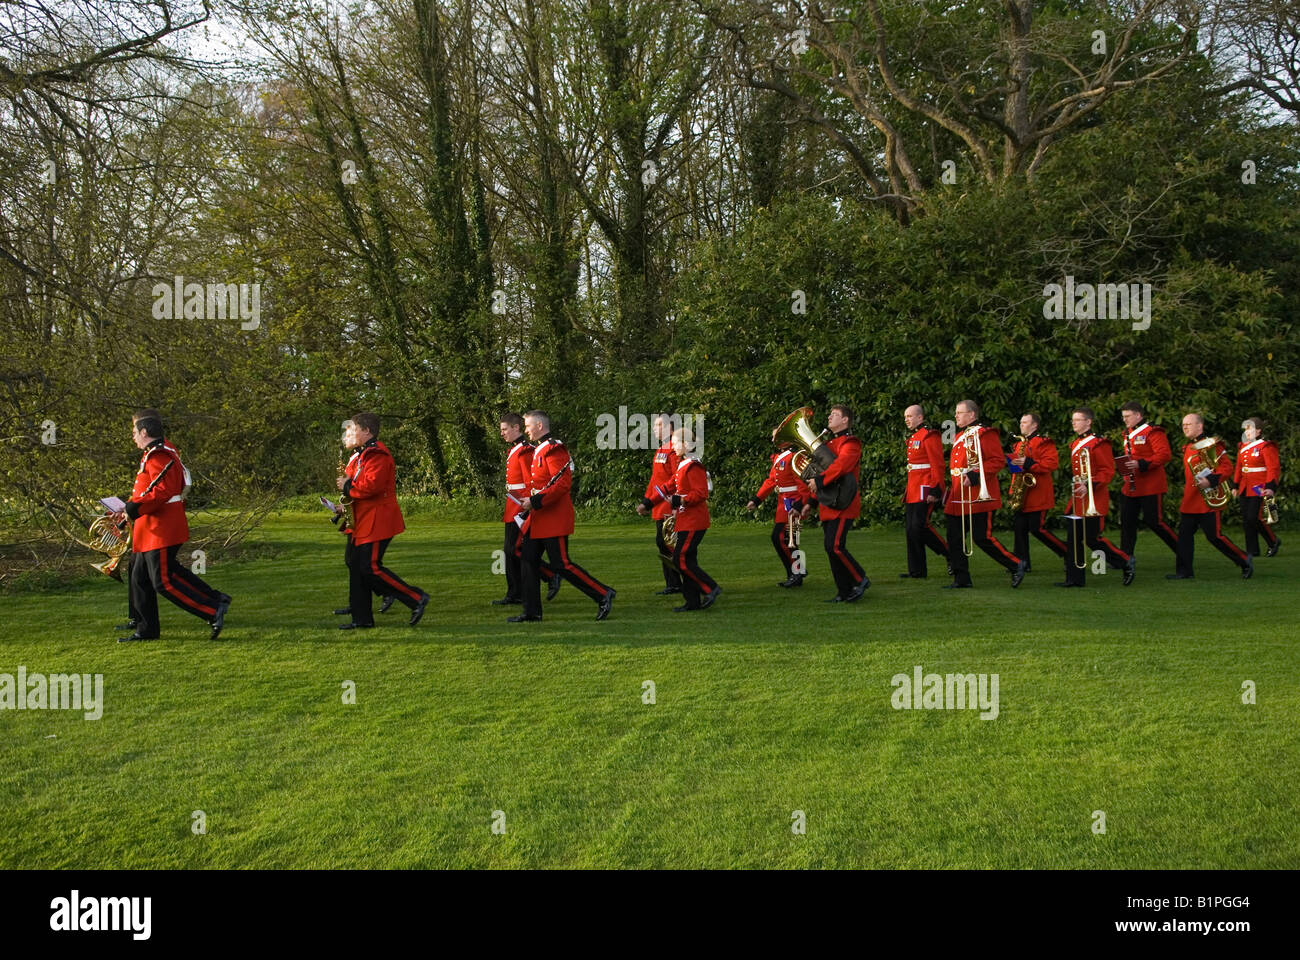 British Army private party hired out to play marching music. Hampshire UK 2008 Stock Photo